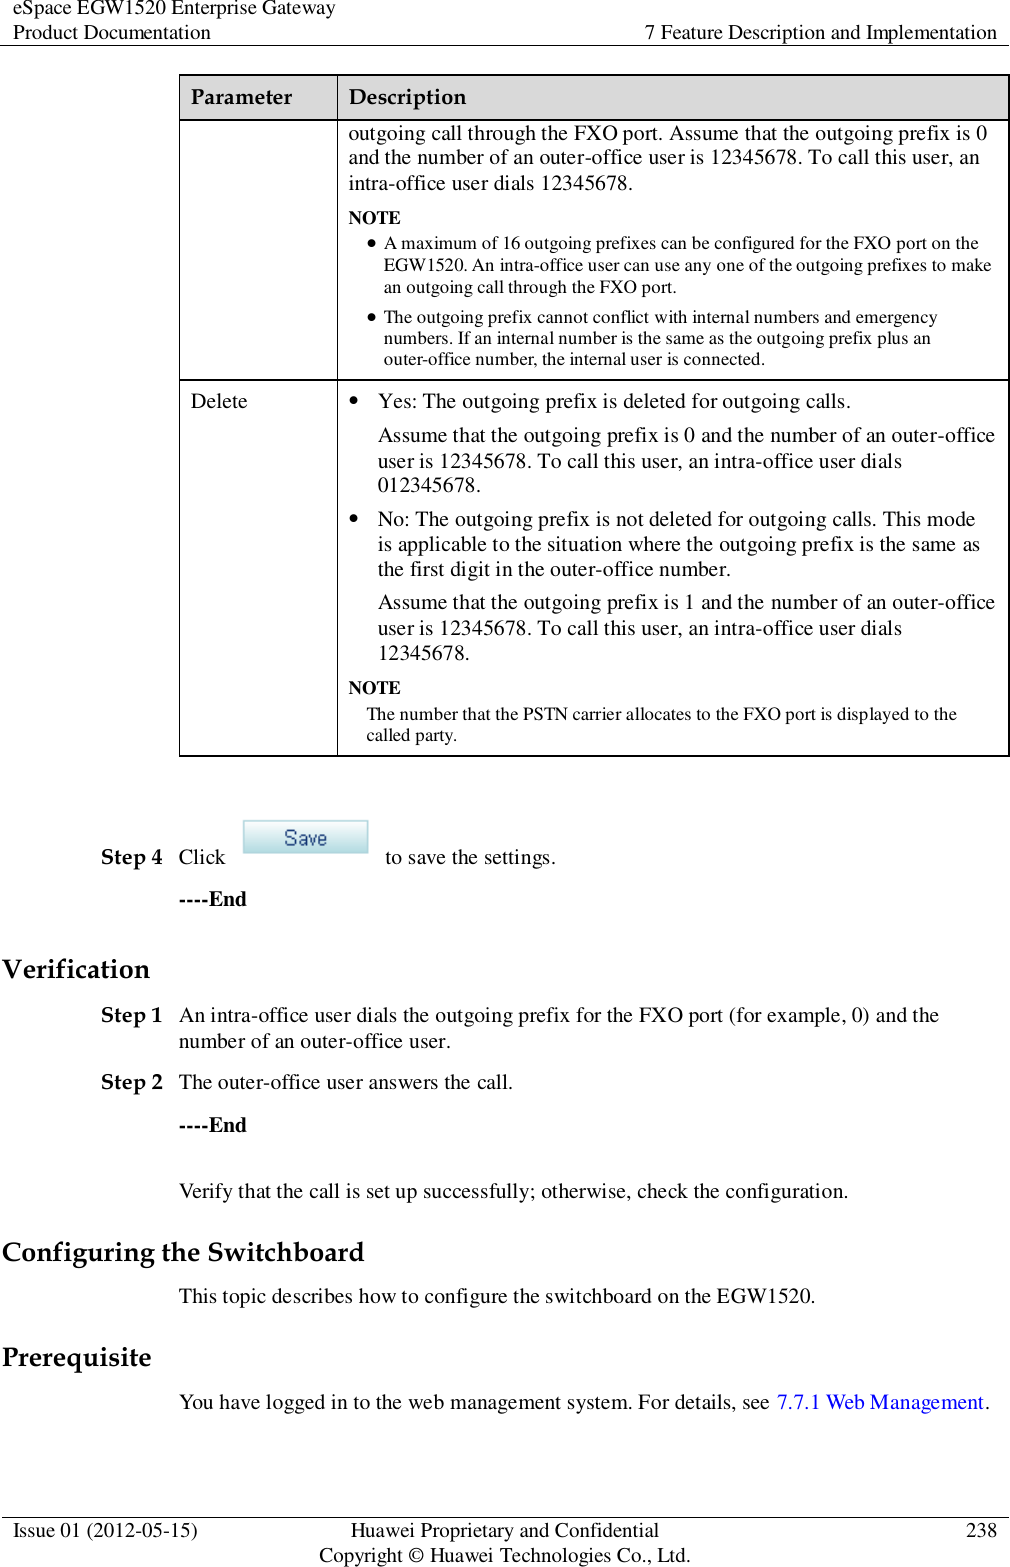 eSpace EGW1520 Enterprise Gateway Product Documentation 7 Feature Description and Implementation  Issue 01 (2012-05-15) Huawei Proprietary and Confidential                                     Copyright © Huawei Technologies Co., Ltd. 238  Parameter Description outgoing call through the FXO port. Assume that the outgoing prefix is 0 and the number of an outer-office user is 12345678. To call this user, an intra-office user dials 12345678. NOTE  A maximum of 16 outgoing prefixes can be configured for the FXO port on the EGW1520. An intra-office user can use any one of the outgoing prefixes to make an outgoing call through the FXO port.  The outgoing prefix cannot conflict with internal numbers and emergency numbers. If an internal number is the same as the outgoing prefix plus an outer-office number, the internal user is connected. Delete  Yes: The outgoing prefix is deleted for outgoing calls. Assume that the outgoing prefix is 0 and the number of an outer-office user is 12345678. To call this user, an intra-office user dials 012345678.  No: The outgoing prefix is not deleted for outgoing calls. This mode is applicable to the situation where the outgoing prefix is the same as the first digit in the outer-office number. Assume that the outgoing prefix is 1 and the number of an outer-office user is 12345678. To call this user, an intra-office user dials 12345678. NOTE The number that the PSTN carrier allocates to the FXO port is displayed to the called party.  Step 4 Click    to save the settings. ----End Verification Step 1 An intra-office user dials the outgoing prefix for the FXO port (for example, 0) and the number of an outer-office user. Step 2 The outer-office user answers the call. ----End Verify that the call is set up successfully; otherwise, check the configuration. Configuring the Switchboard This topic describes how to configure the switchboard on the EGW1520. Prerequisite You have logged in to the web management system. For details, see 7.7.1 Web Management. 